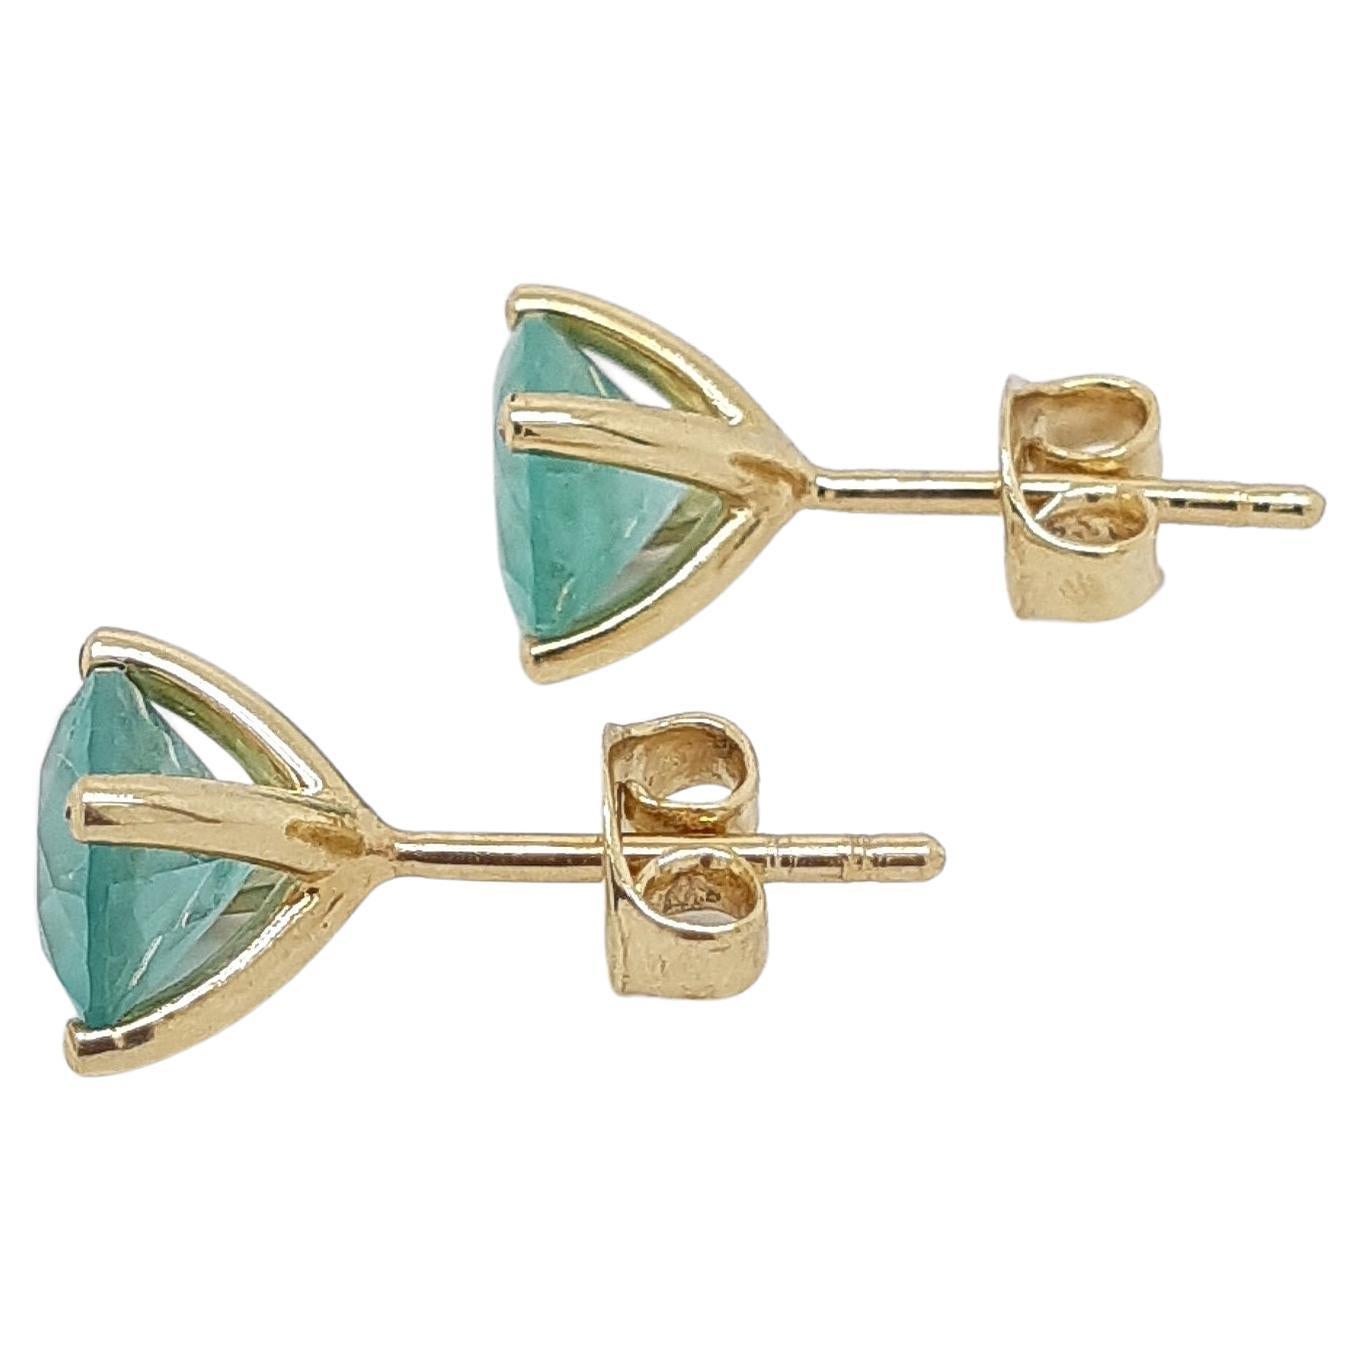 FOR U.S. BUYERS NO VAT 

If you want to add color to any style you chose, these 14kt yellow emerald stud earrings weighing 2.11 grams are definitely for you. These gorgeous earrings feature two round brilliant cut bluish green emeralds set in 14kt